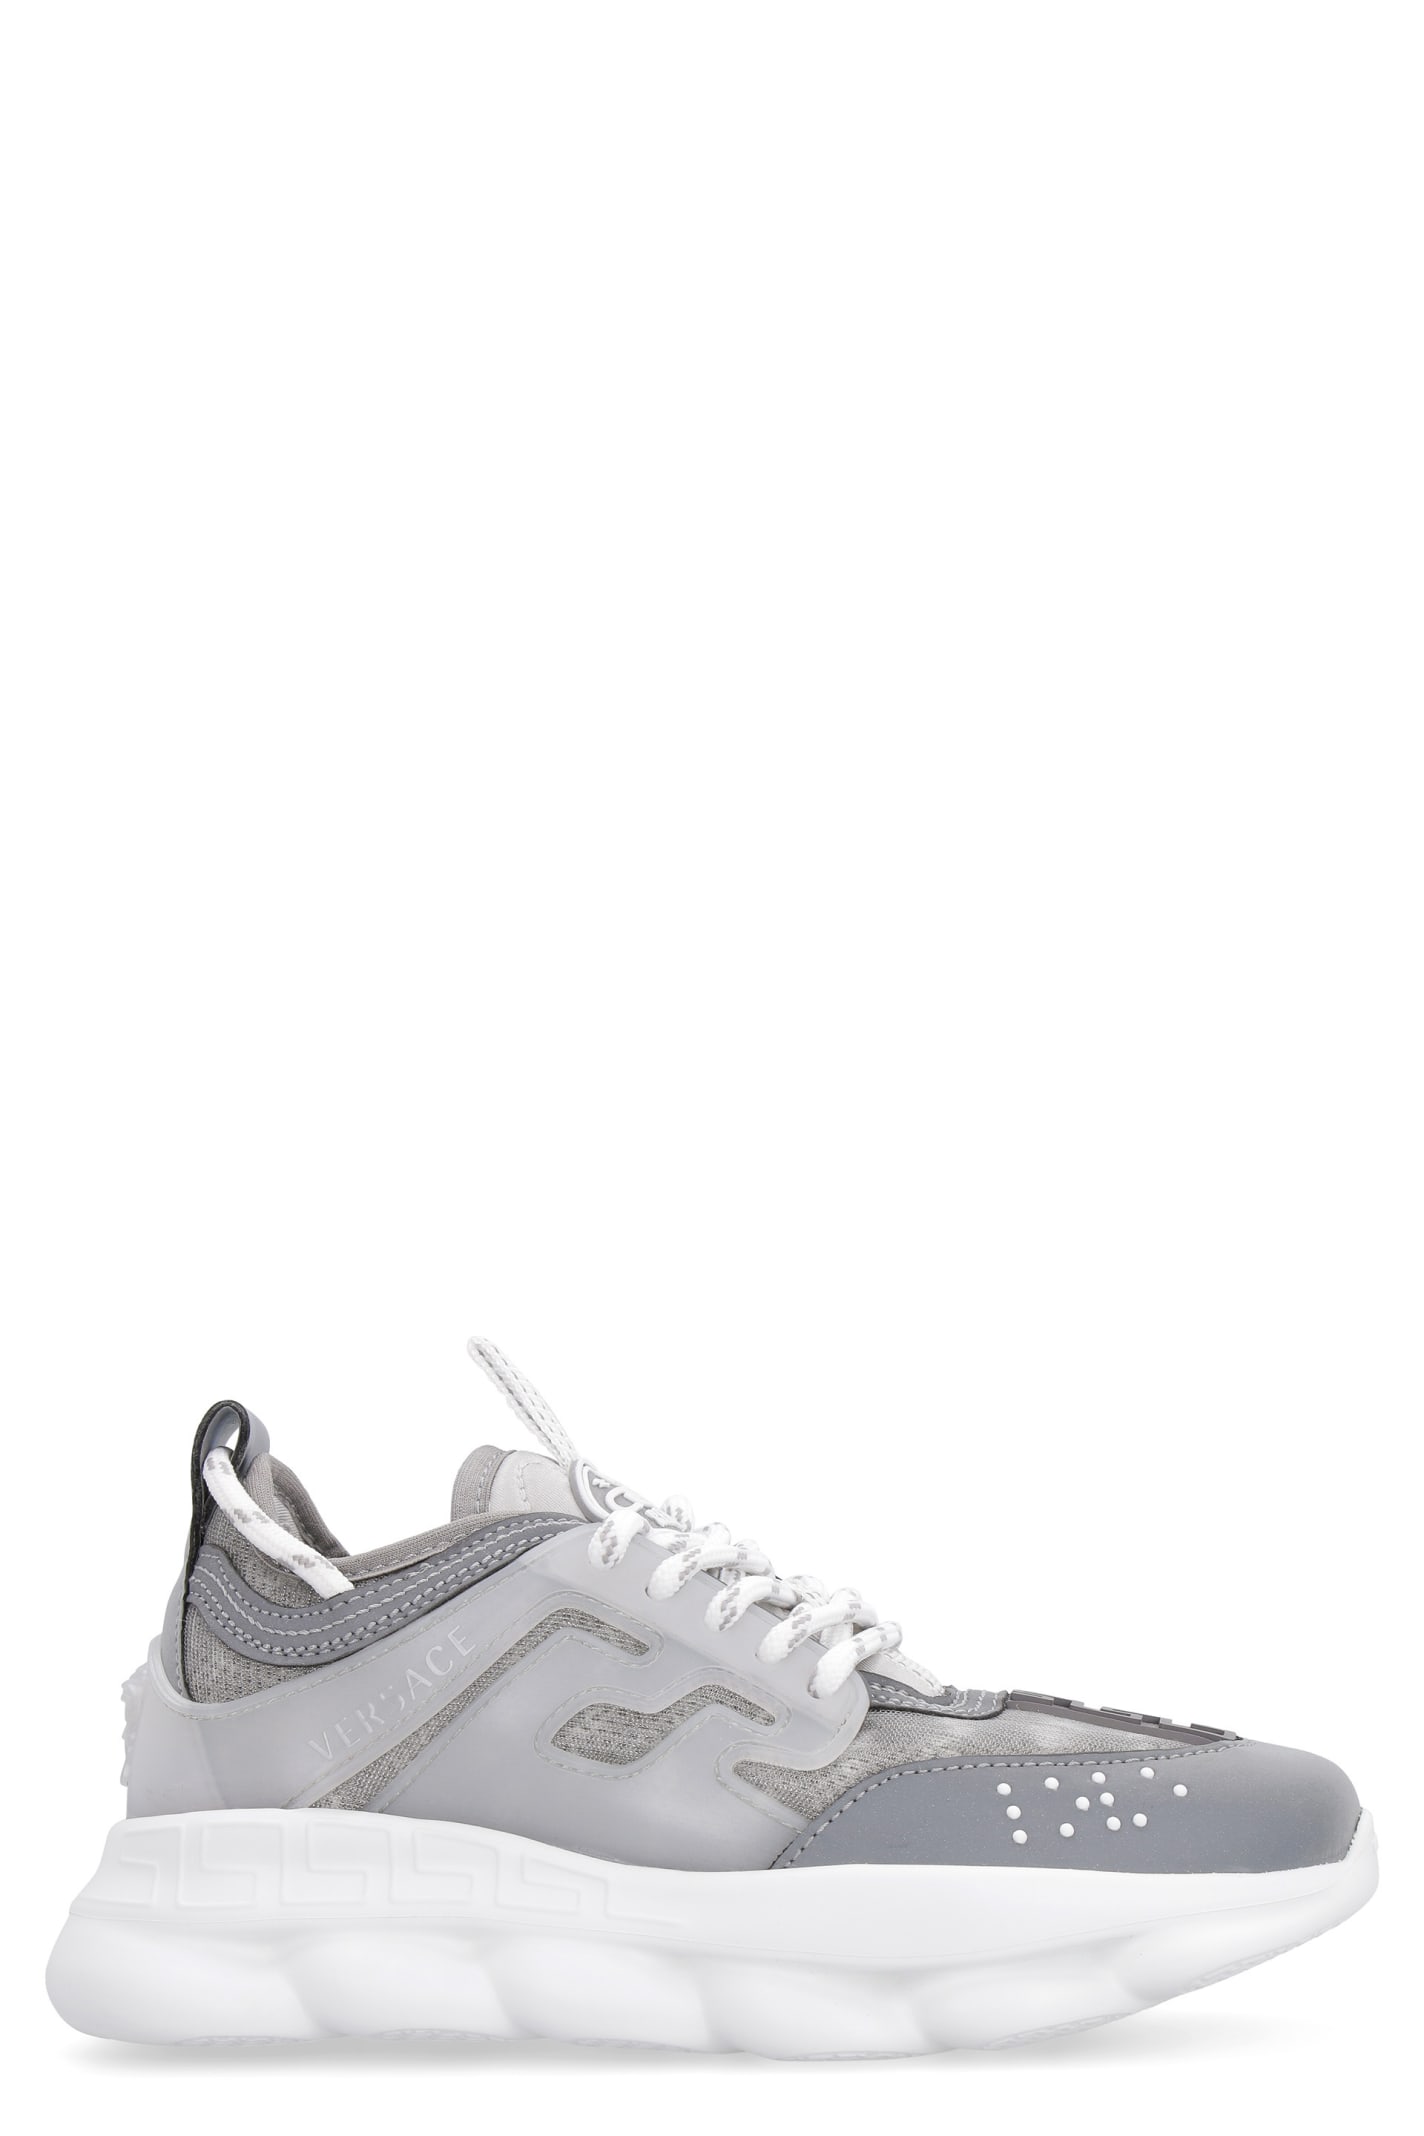 Young Versace Chain Reaction Low-top Sneakers